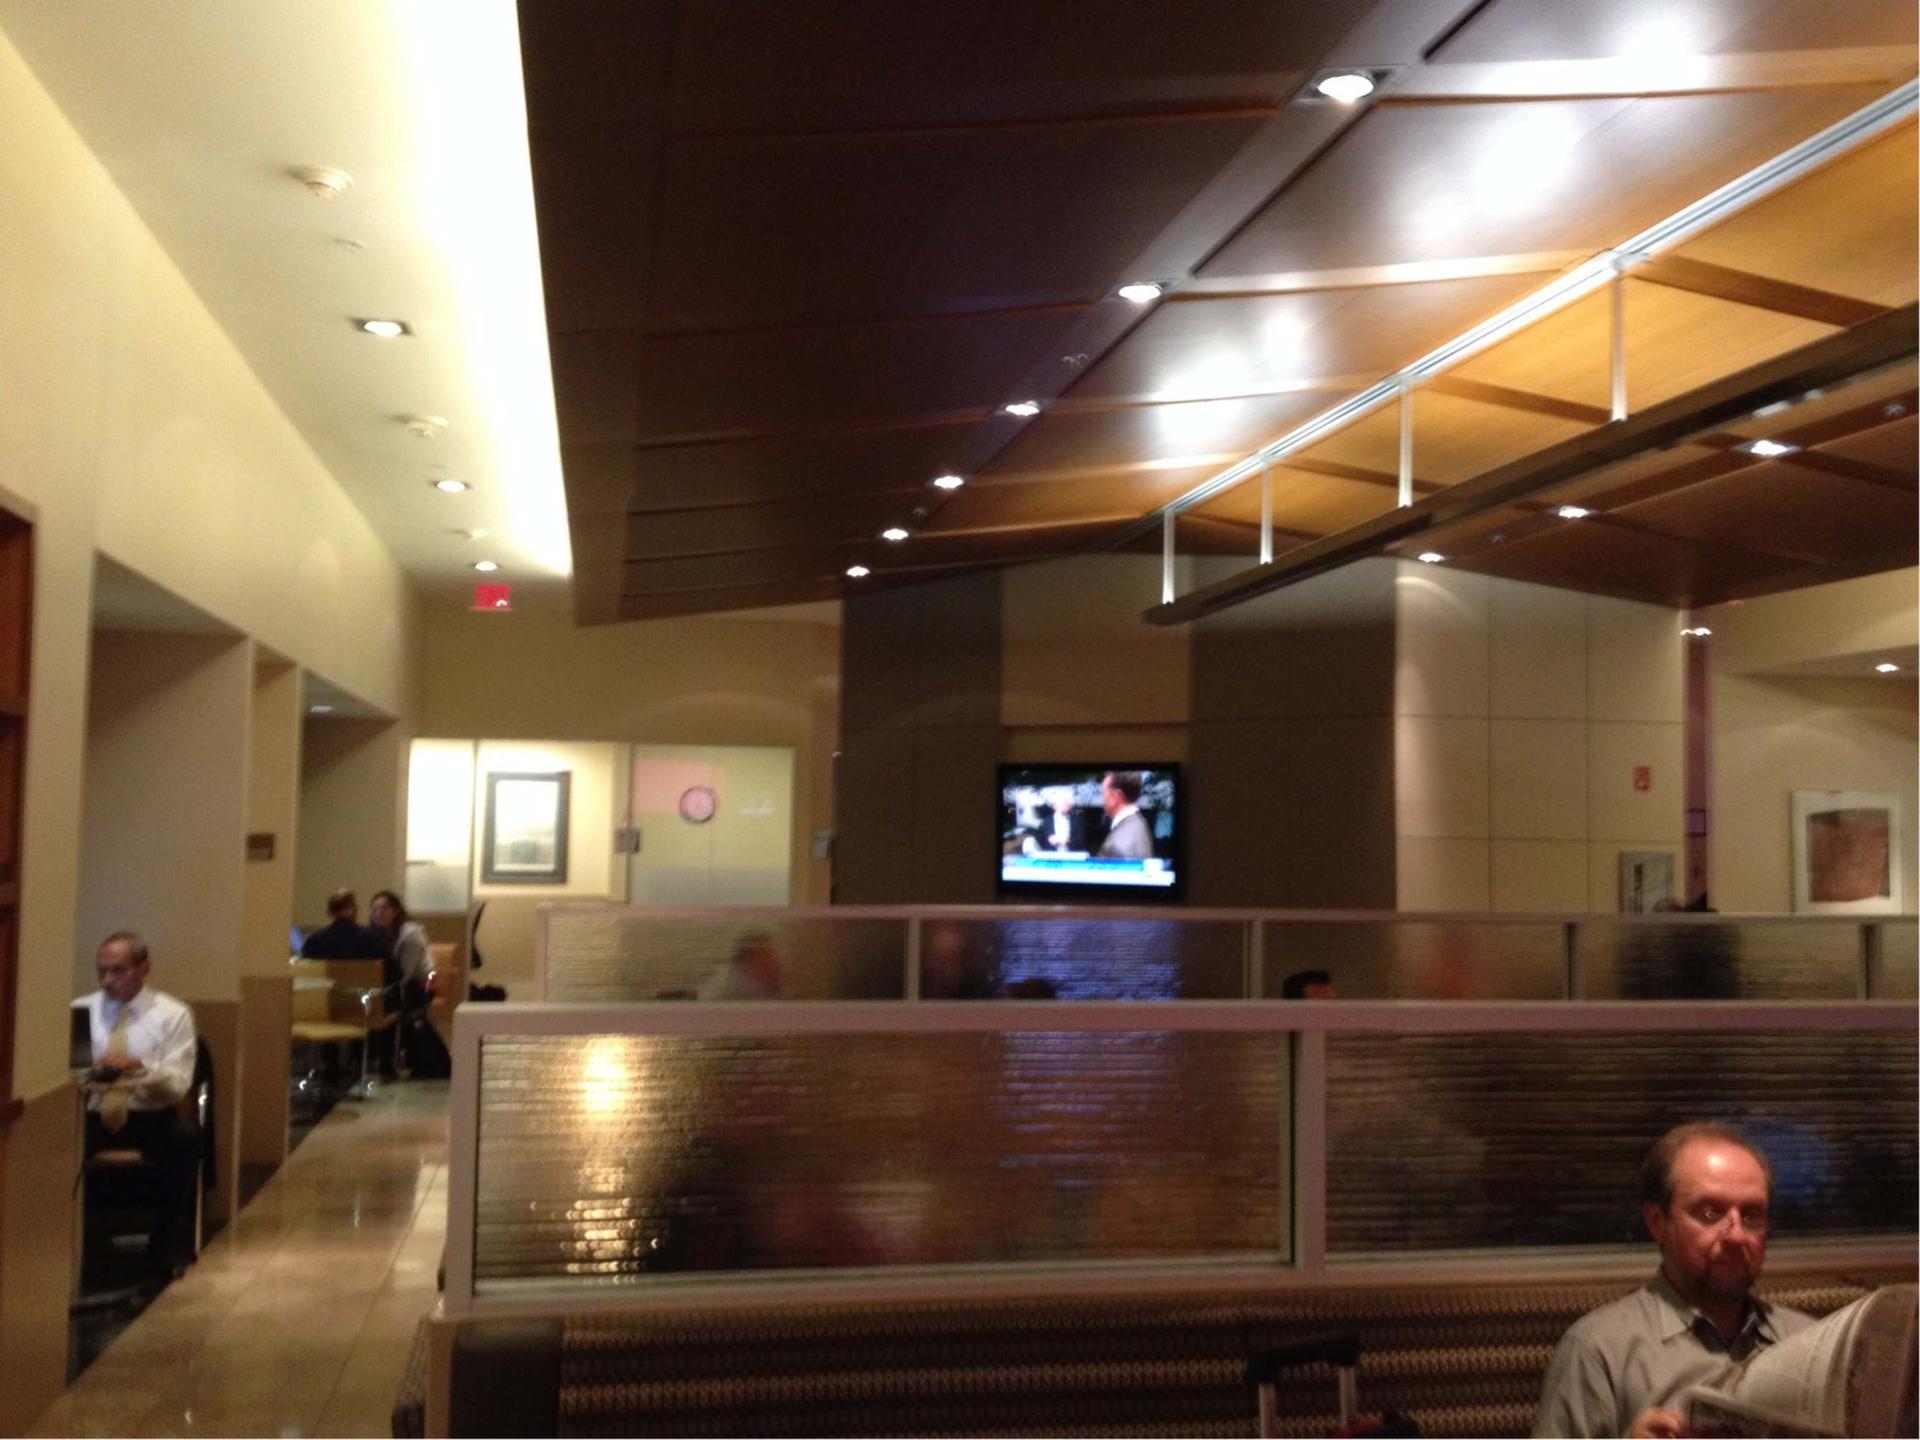 American Airlines Admirals Club image 13 of 31